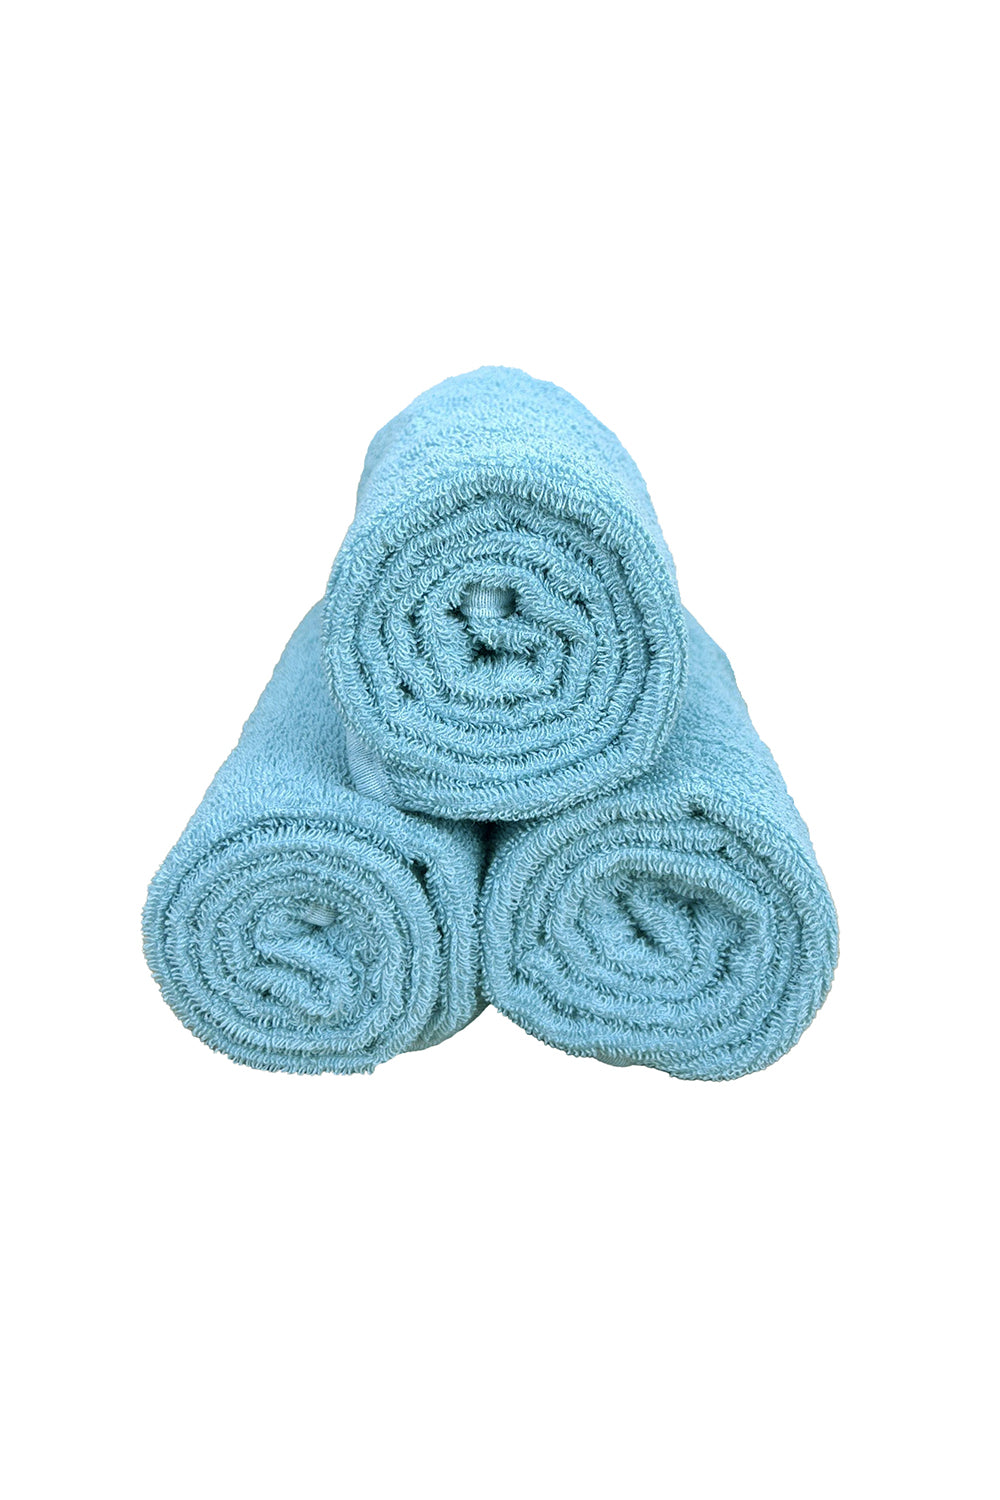 Car Wash Cotton China Terry Cloth Cleaning Drying Towels, Blue